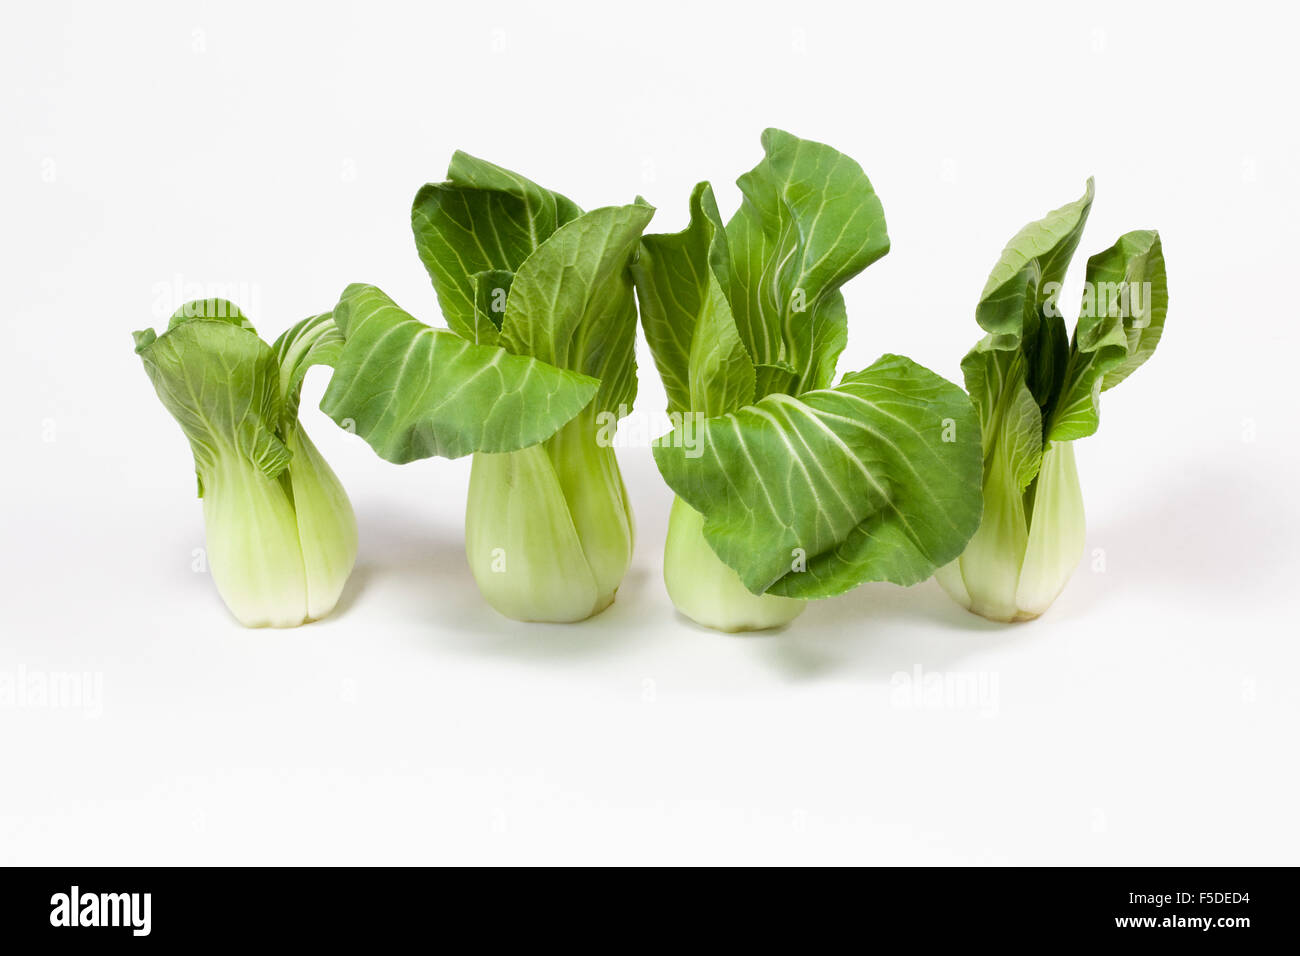 Brassica rapa. Trimmed and washed miniature pak choi on a white background. Stock Photo